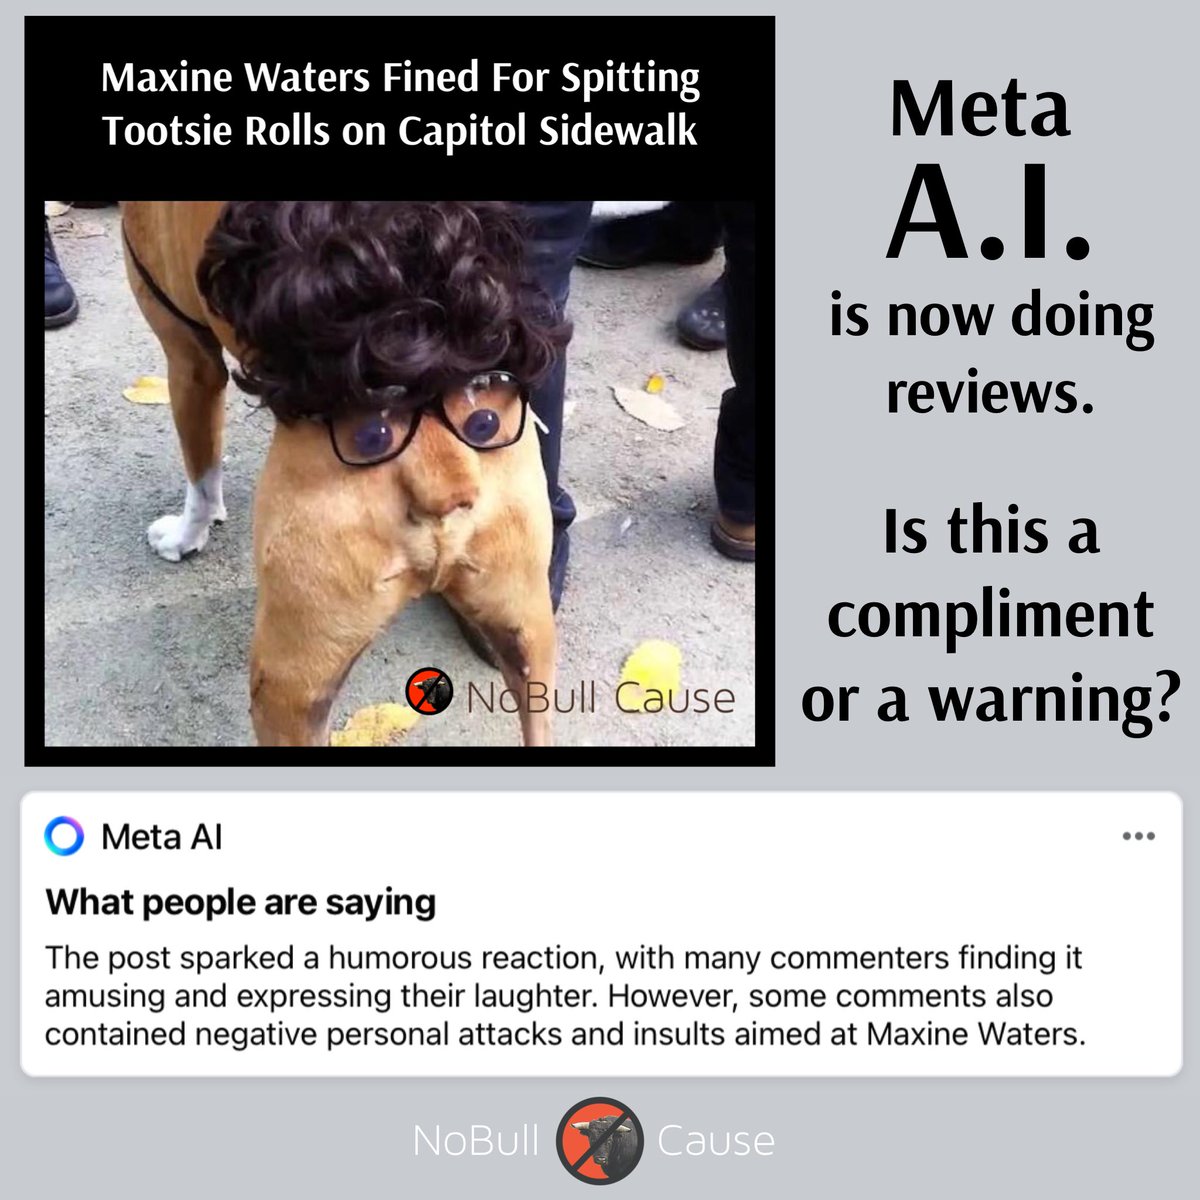 I’m seeing these now on my Facebook page. They’re using AI to review memes. Big brother is real. Maybe it’s a compliment. Maybe it’s a warning. I’m too small a player on X to see any Grok reviews… if they even exist. But I’ll bet it’s watching and analyzing everything on this